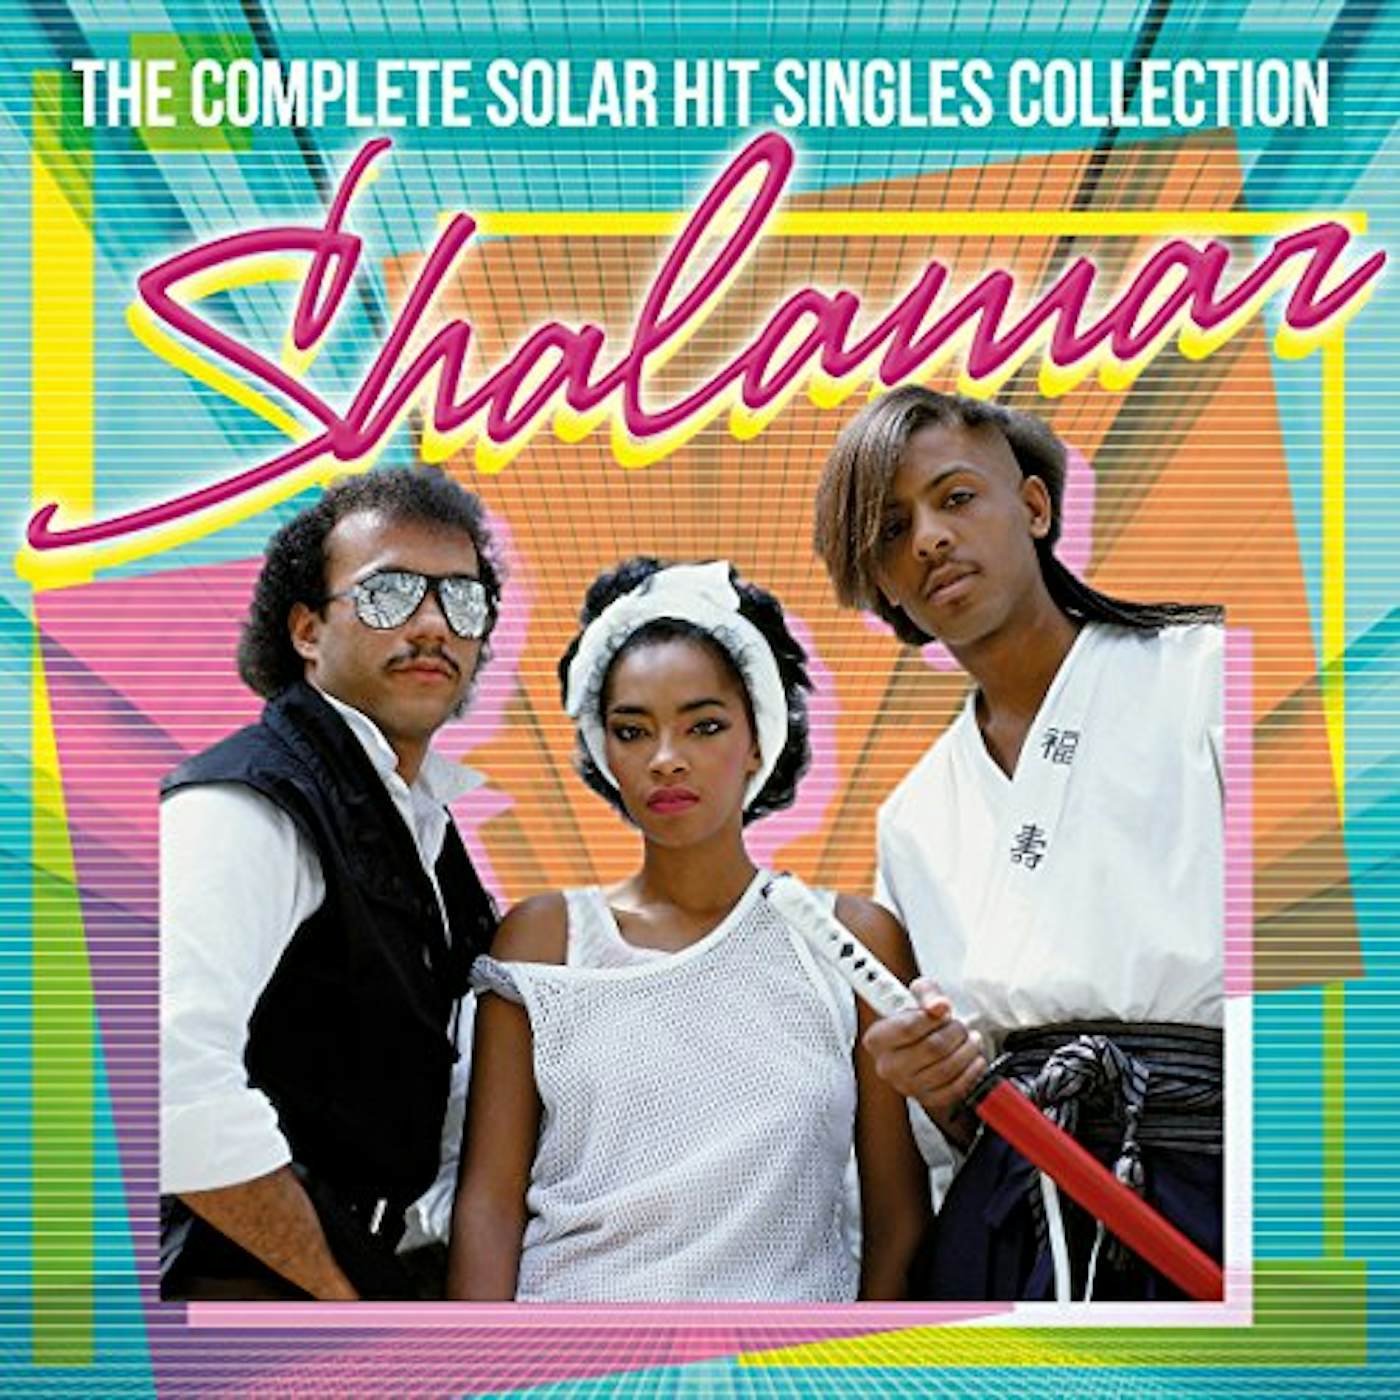 Shalamar COMPLETE SOLAR HIT SINGLES COLLECTION CD